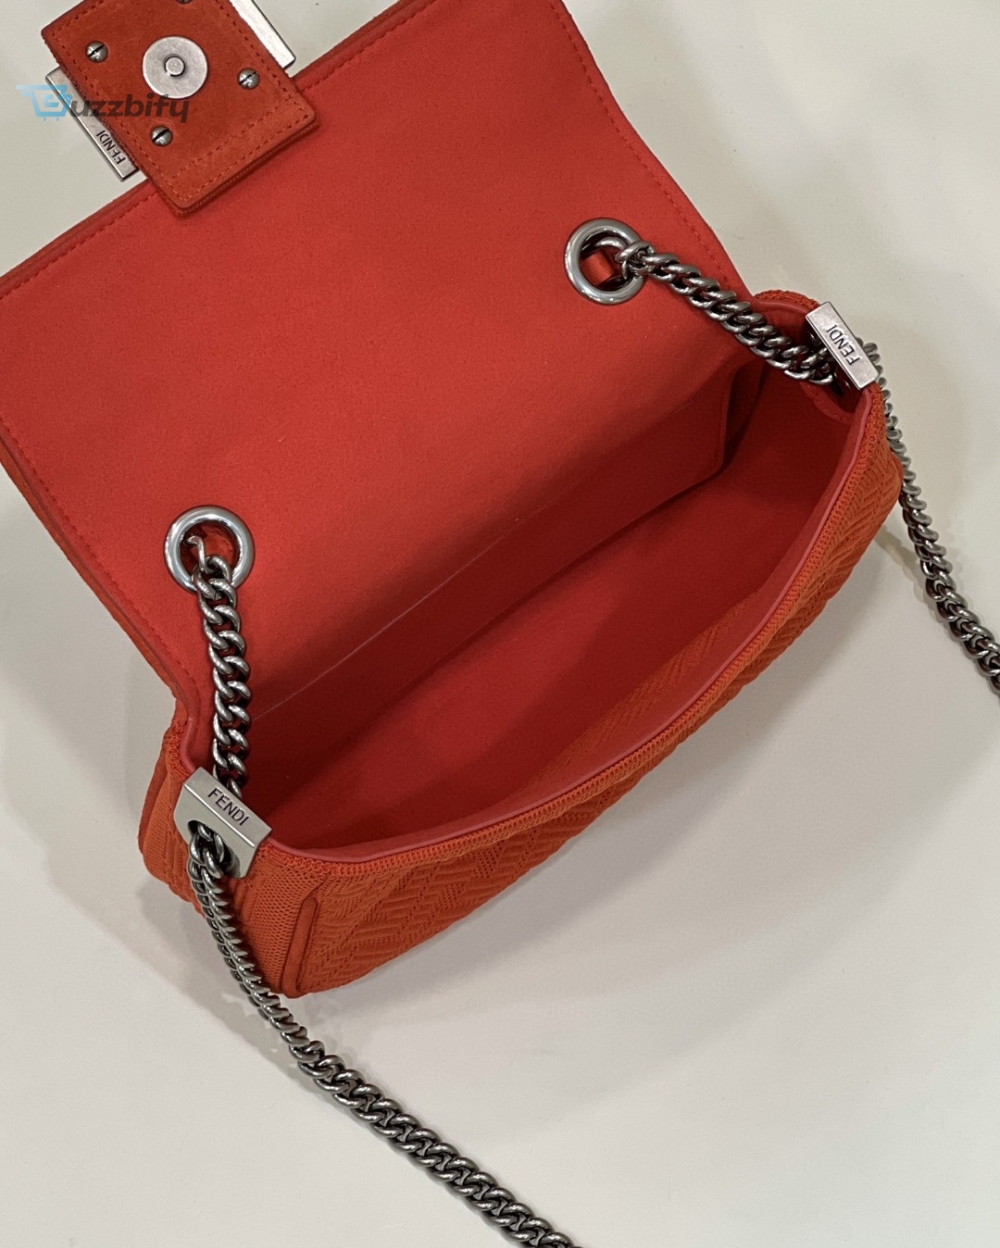 Fendi earrings Baguette Chain Midi Red FF Fabric Bag For Woman 14.5cm/6in 8BR793AHW5F1F2I 